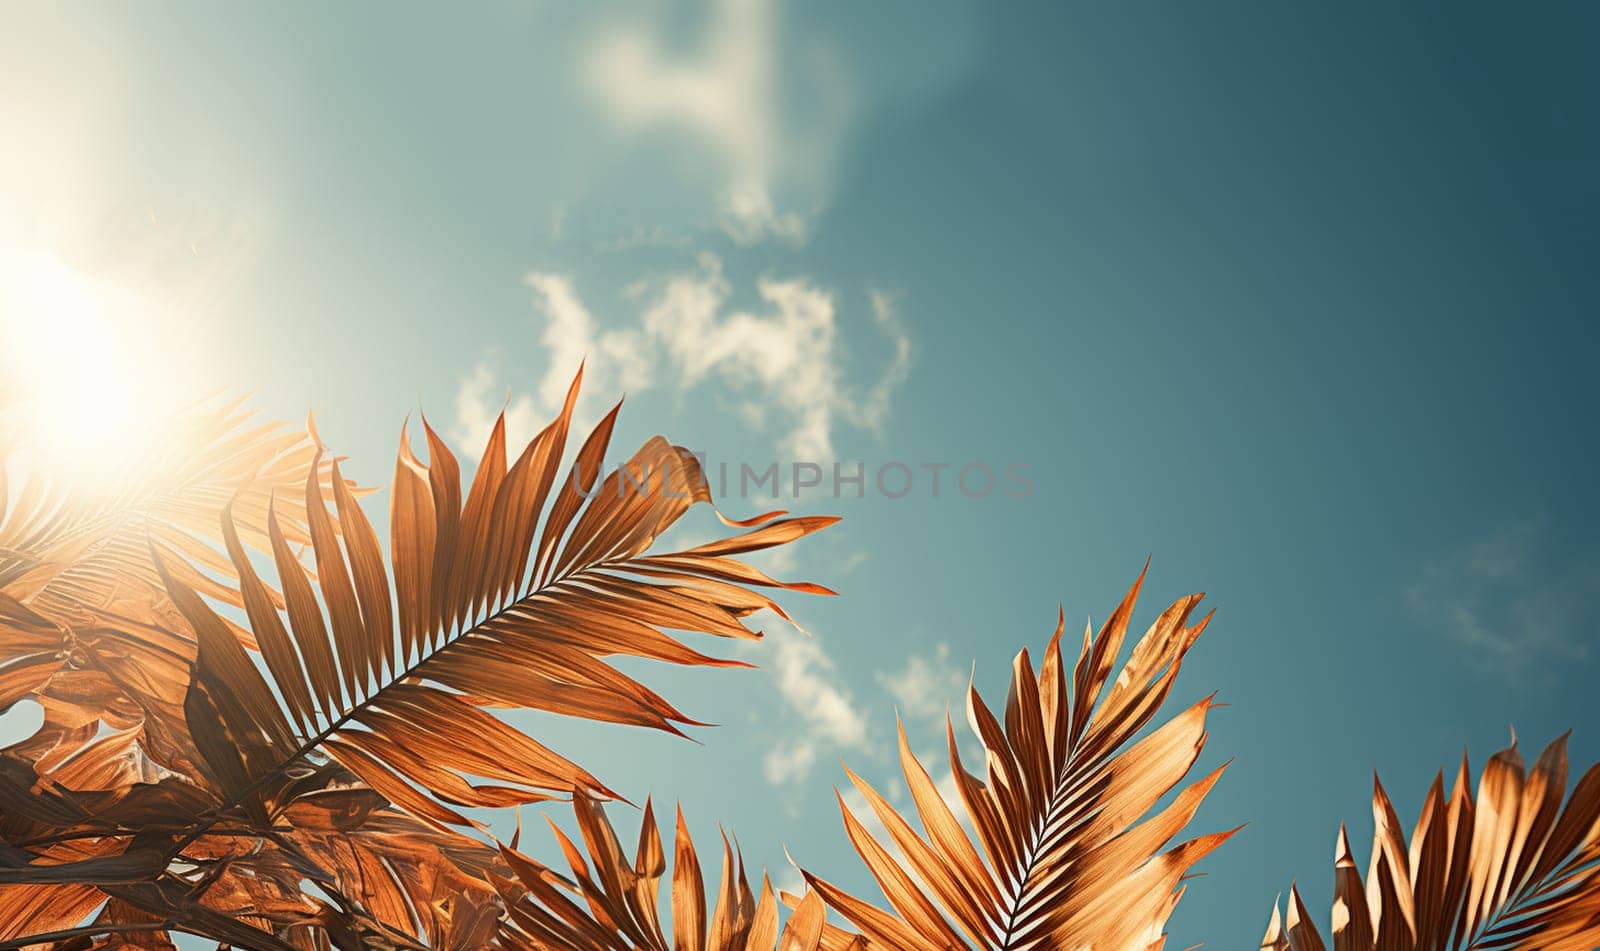 Palm leaves oin the sky with sepia tones.Palm tree with coconut, retro style photo. Summer travel destination. Fluffy palm leaf on sunset sky. Romantic honeymoon or holiday banner template. Coco palm crown view from ground. Tropical nature copy space space for text